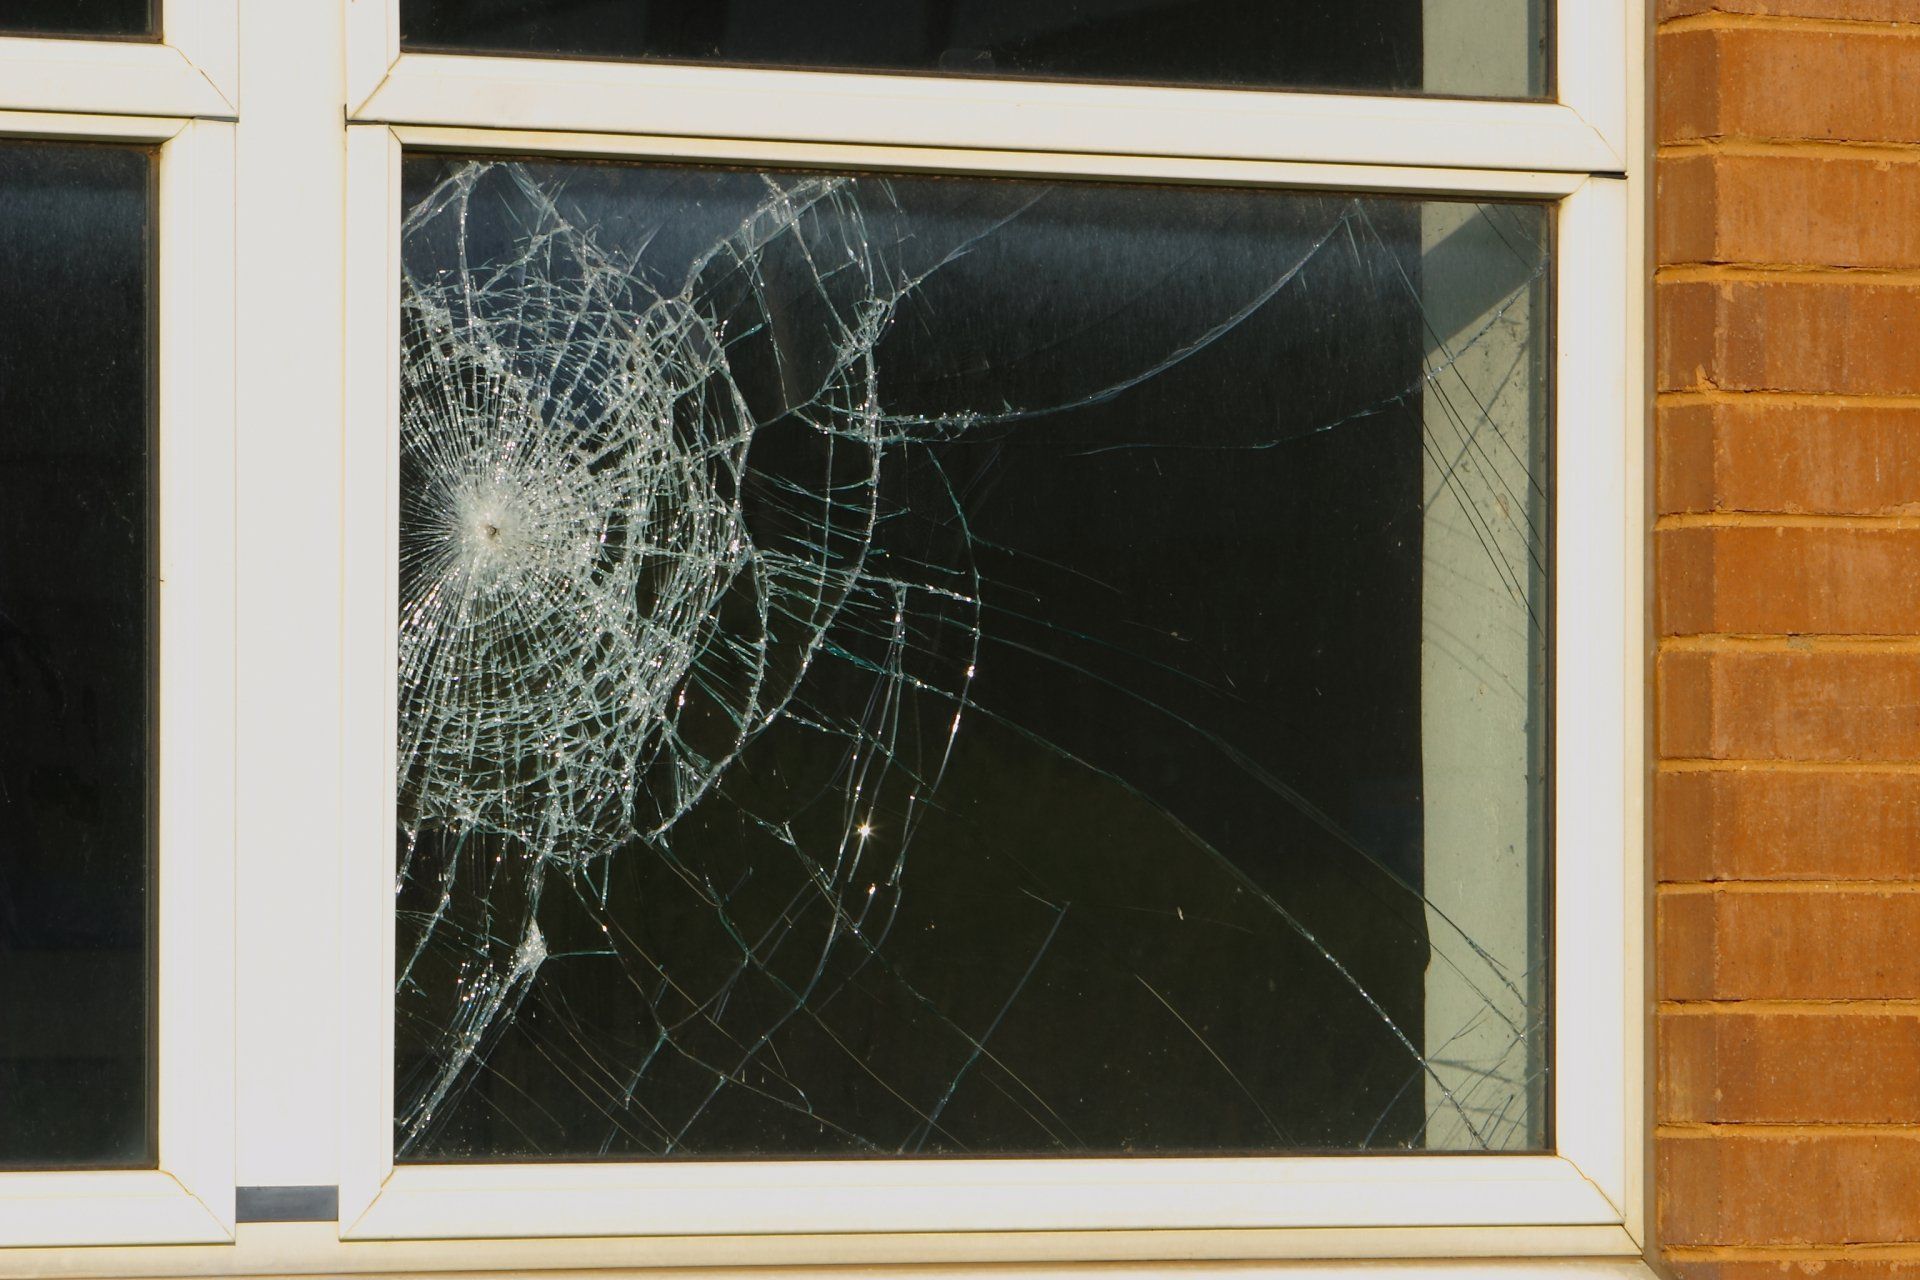 Broken Glass Window Can be Helped with Window Security Film - Tint Technologies in Colorado Springs